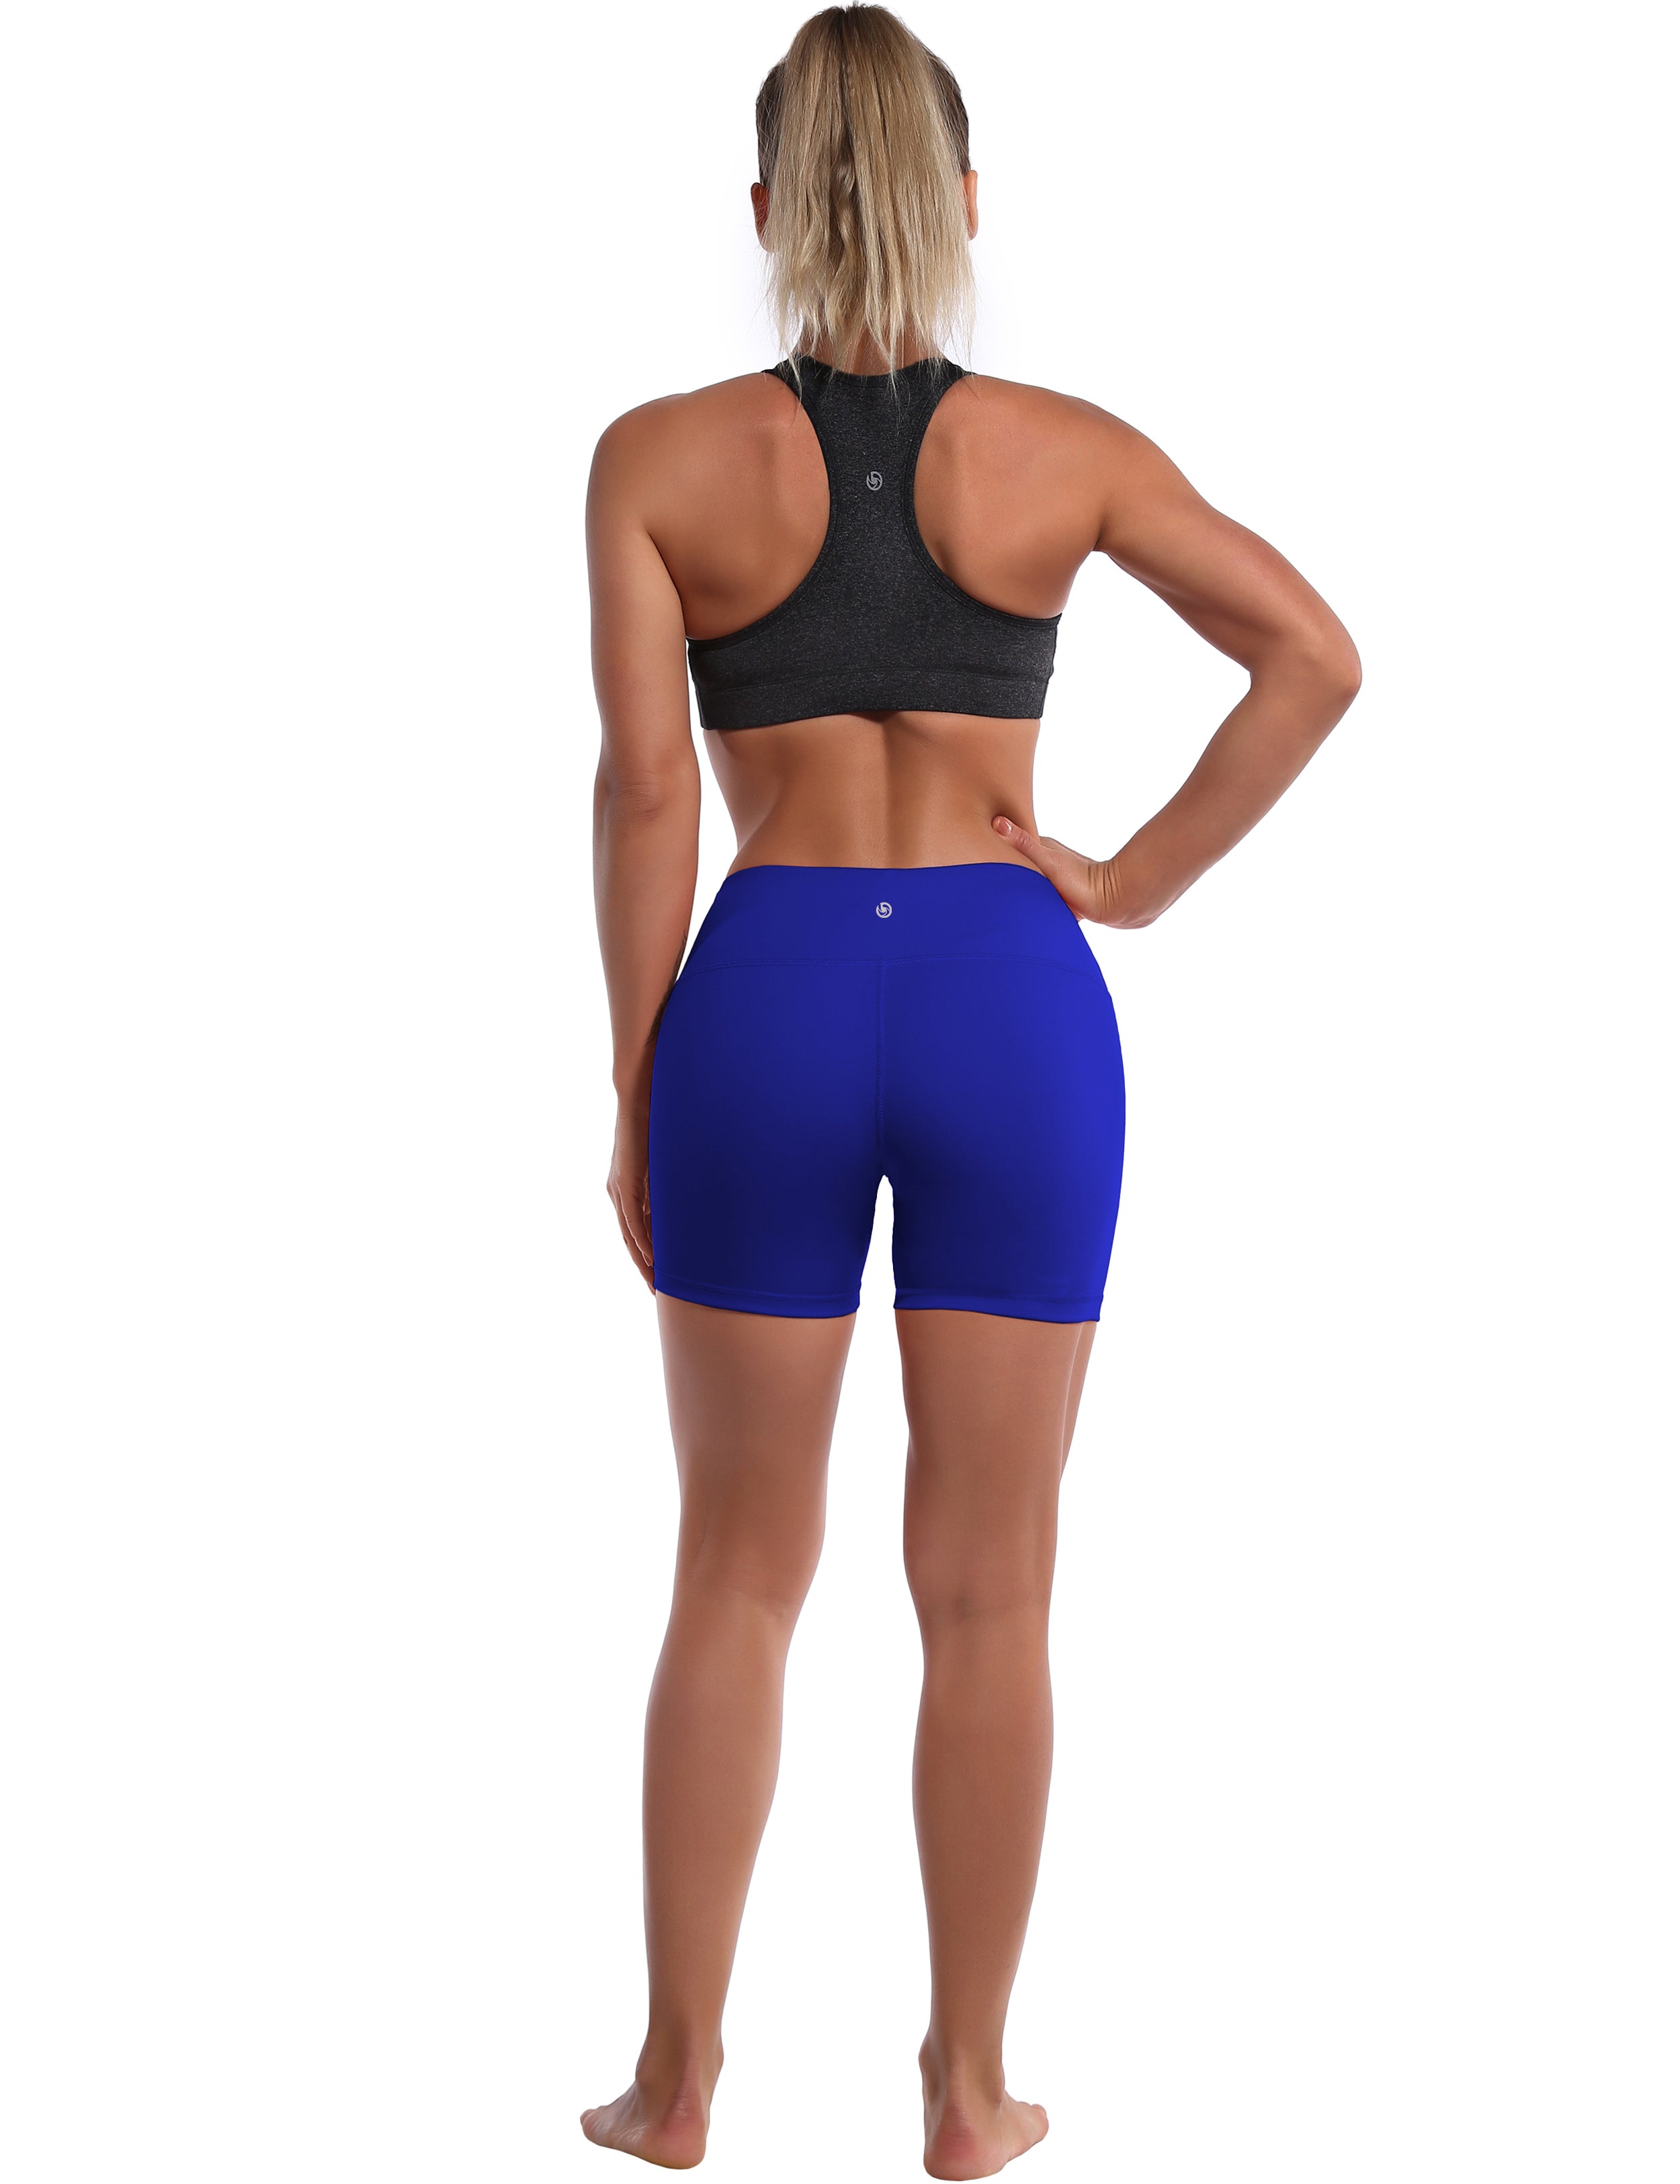 4" Yoga Shorts navy Sleek, soft, smooth and totally comfortable: our newest style is here. Softest-ever fabric High elasticity High density 4-way stretch Fabric doesn't attract lint easily No see-through Moisture-wicking Machine wash 75% Nylon, 25% Spandex